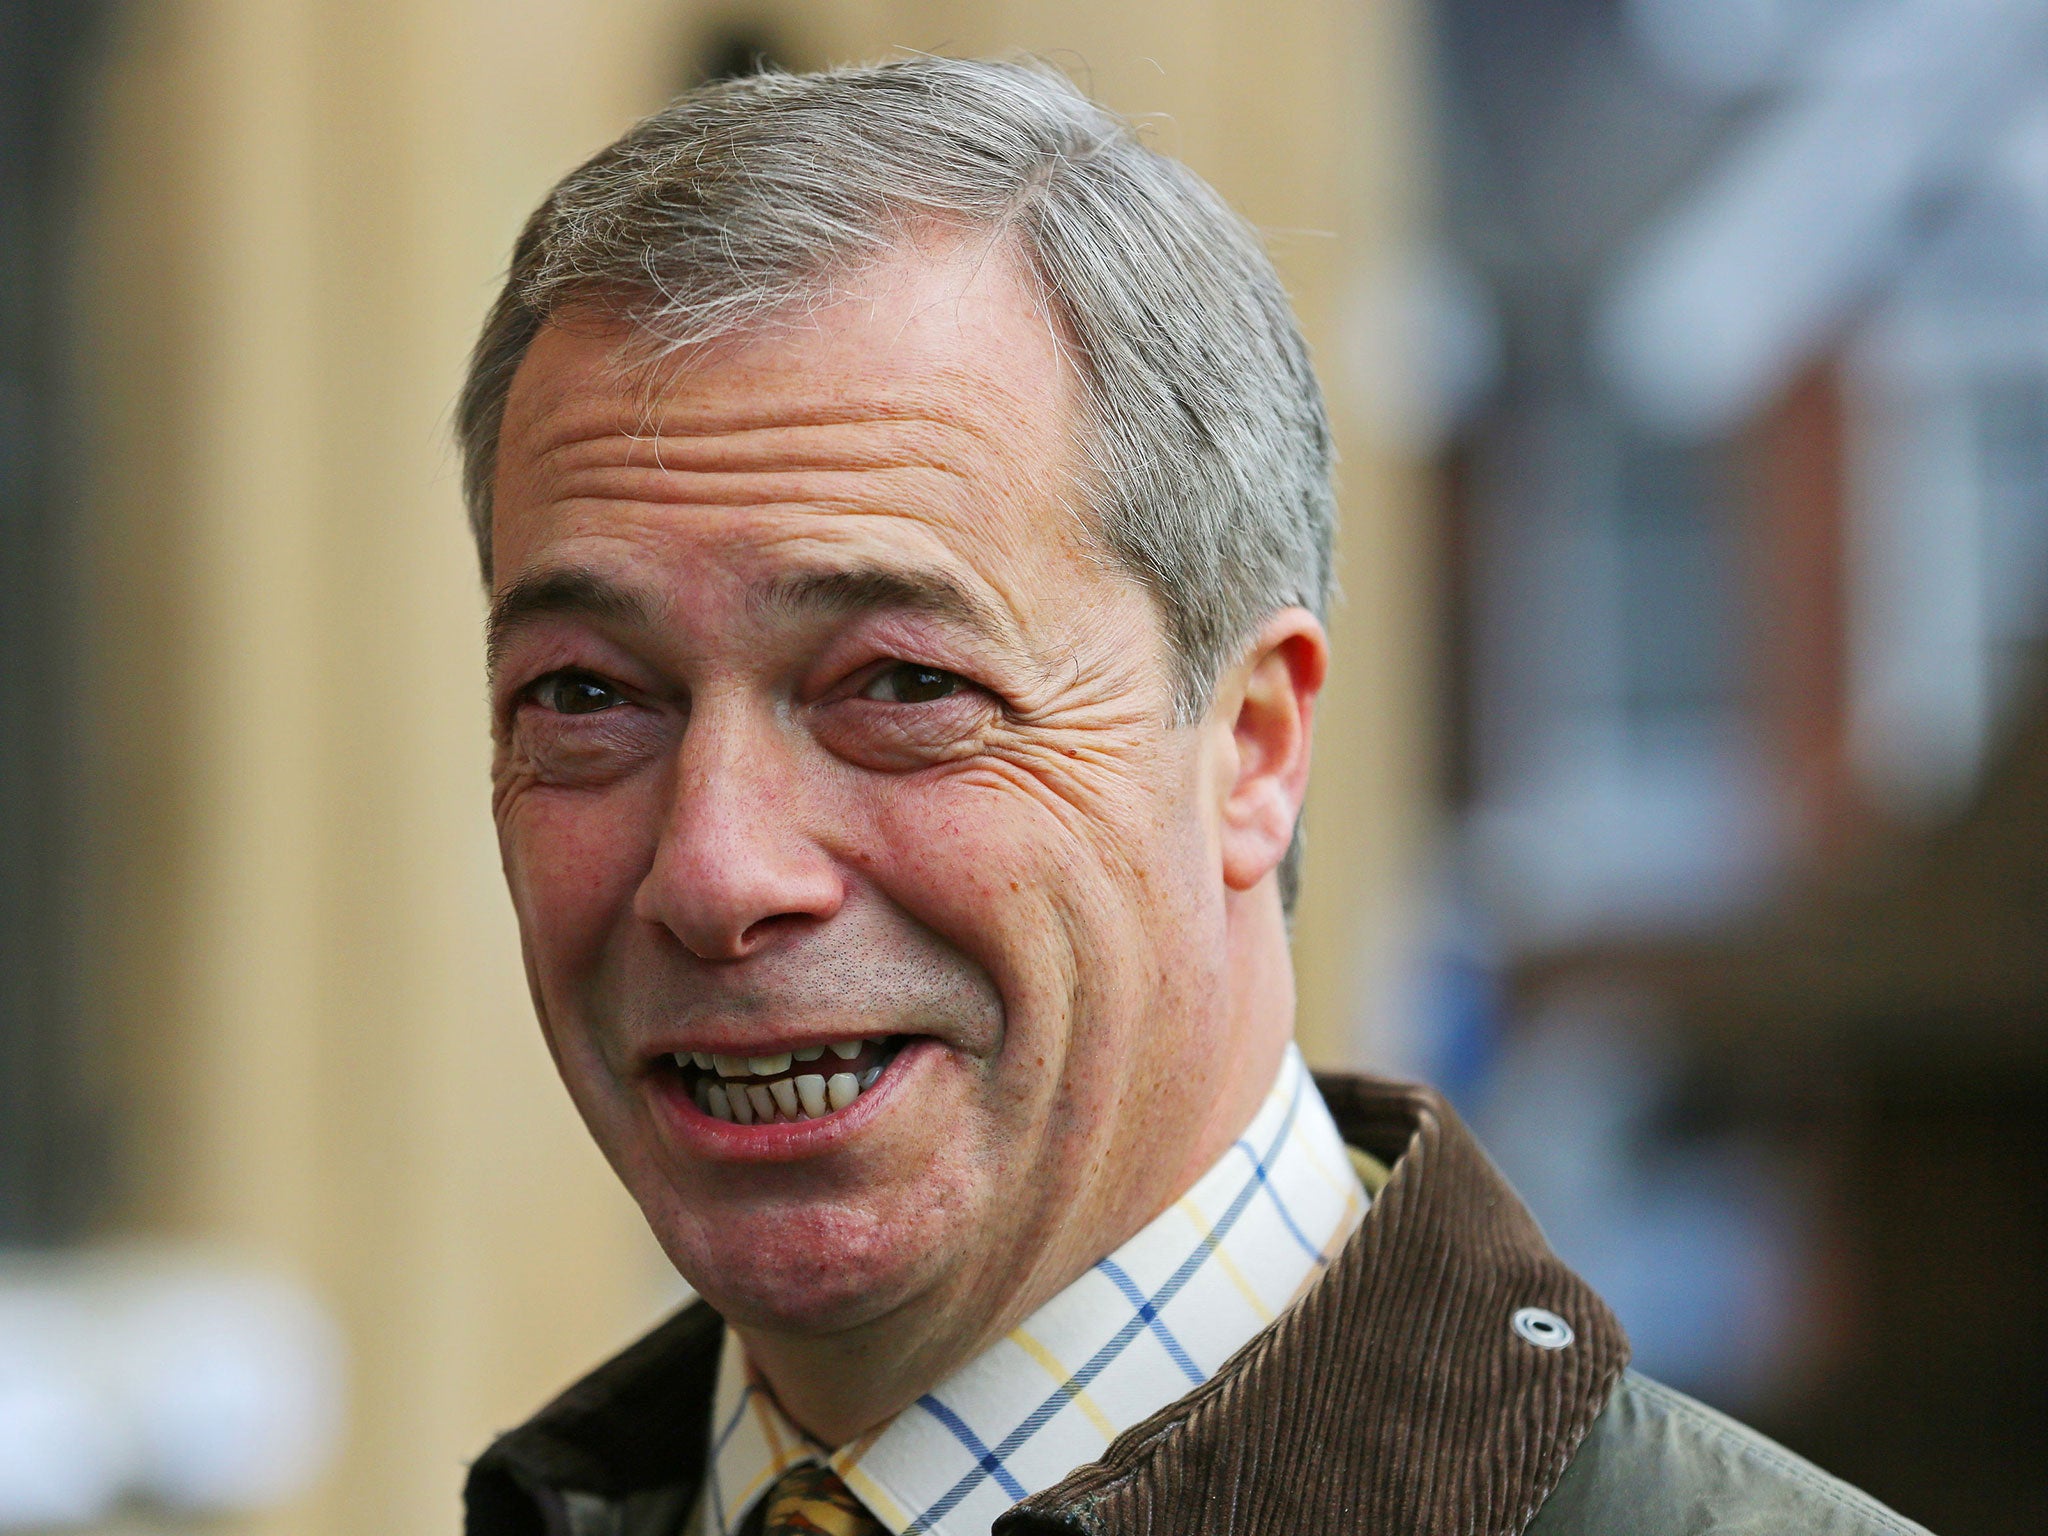 Nigel Farage has said children of new immigrants should not be allowed state education until they have lived in the UK for five years